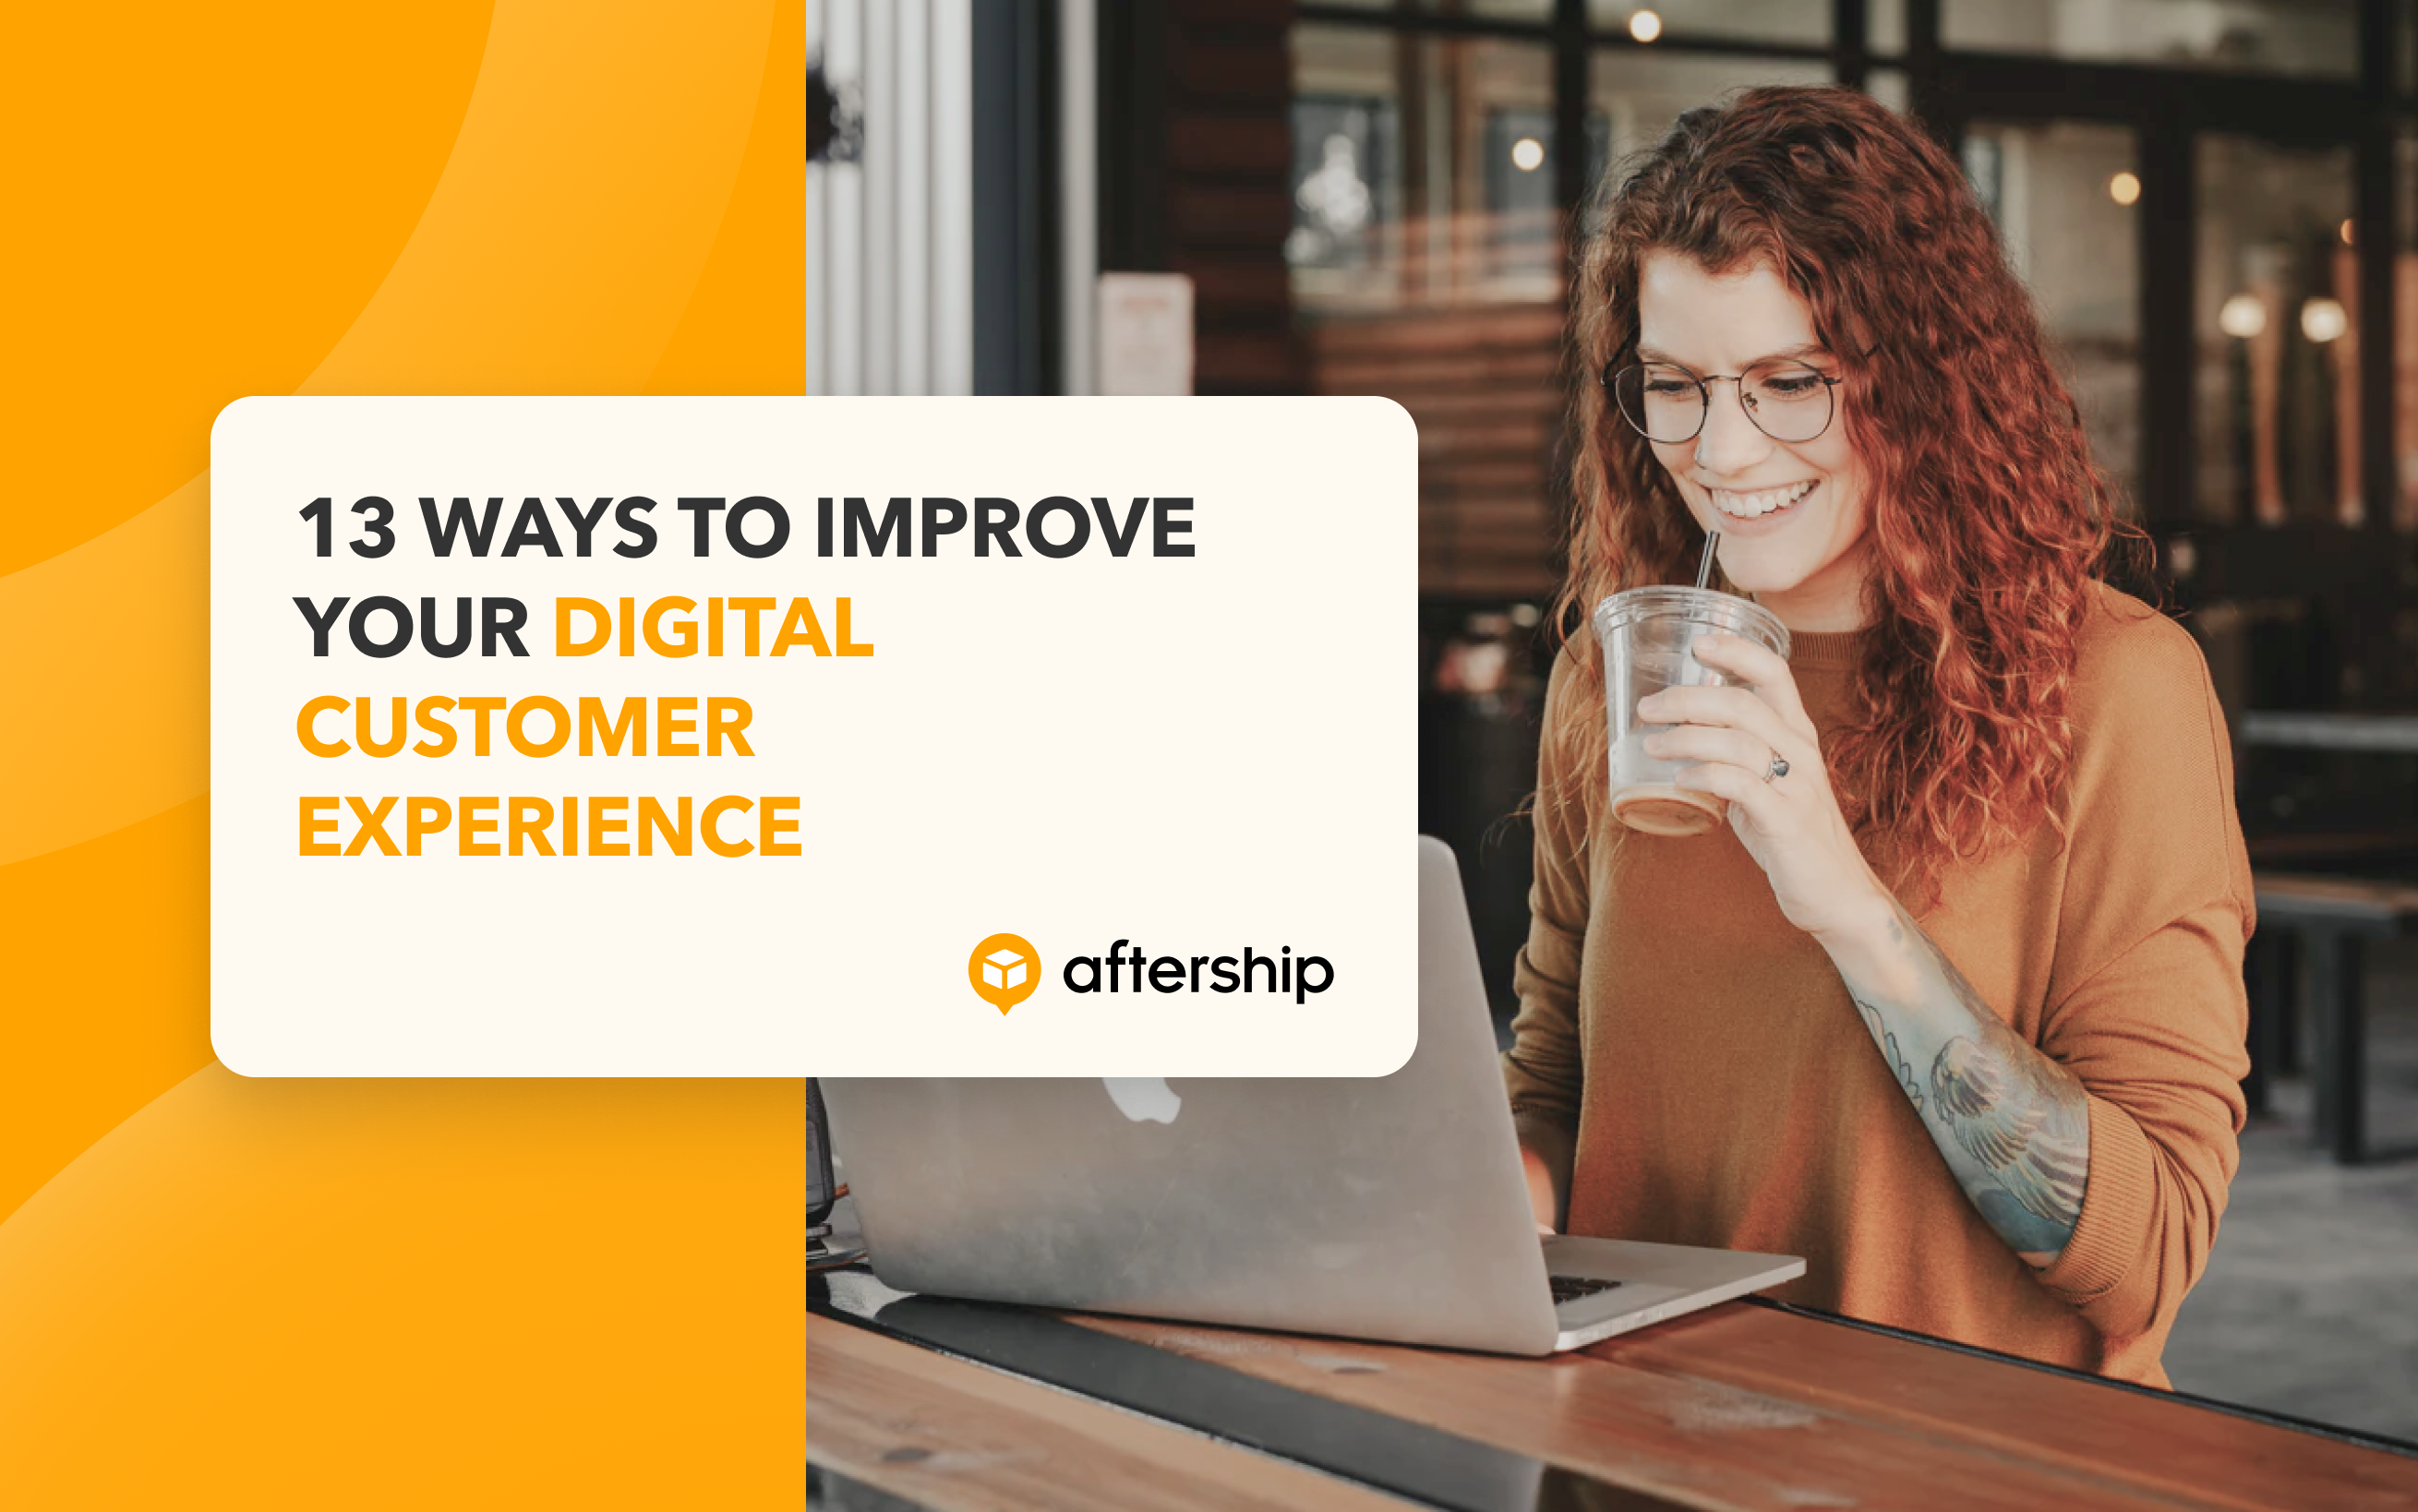 13 ways to improve your digital customer experience to increase sales